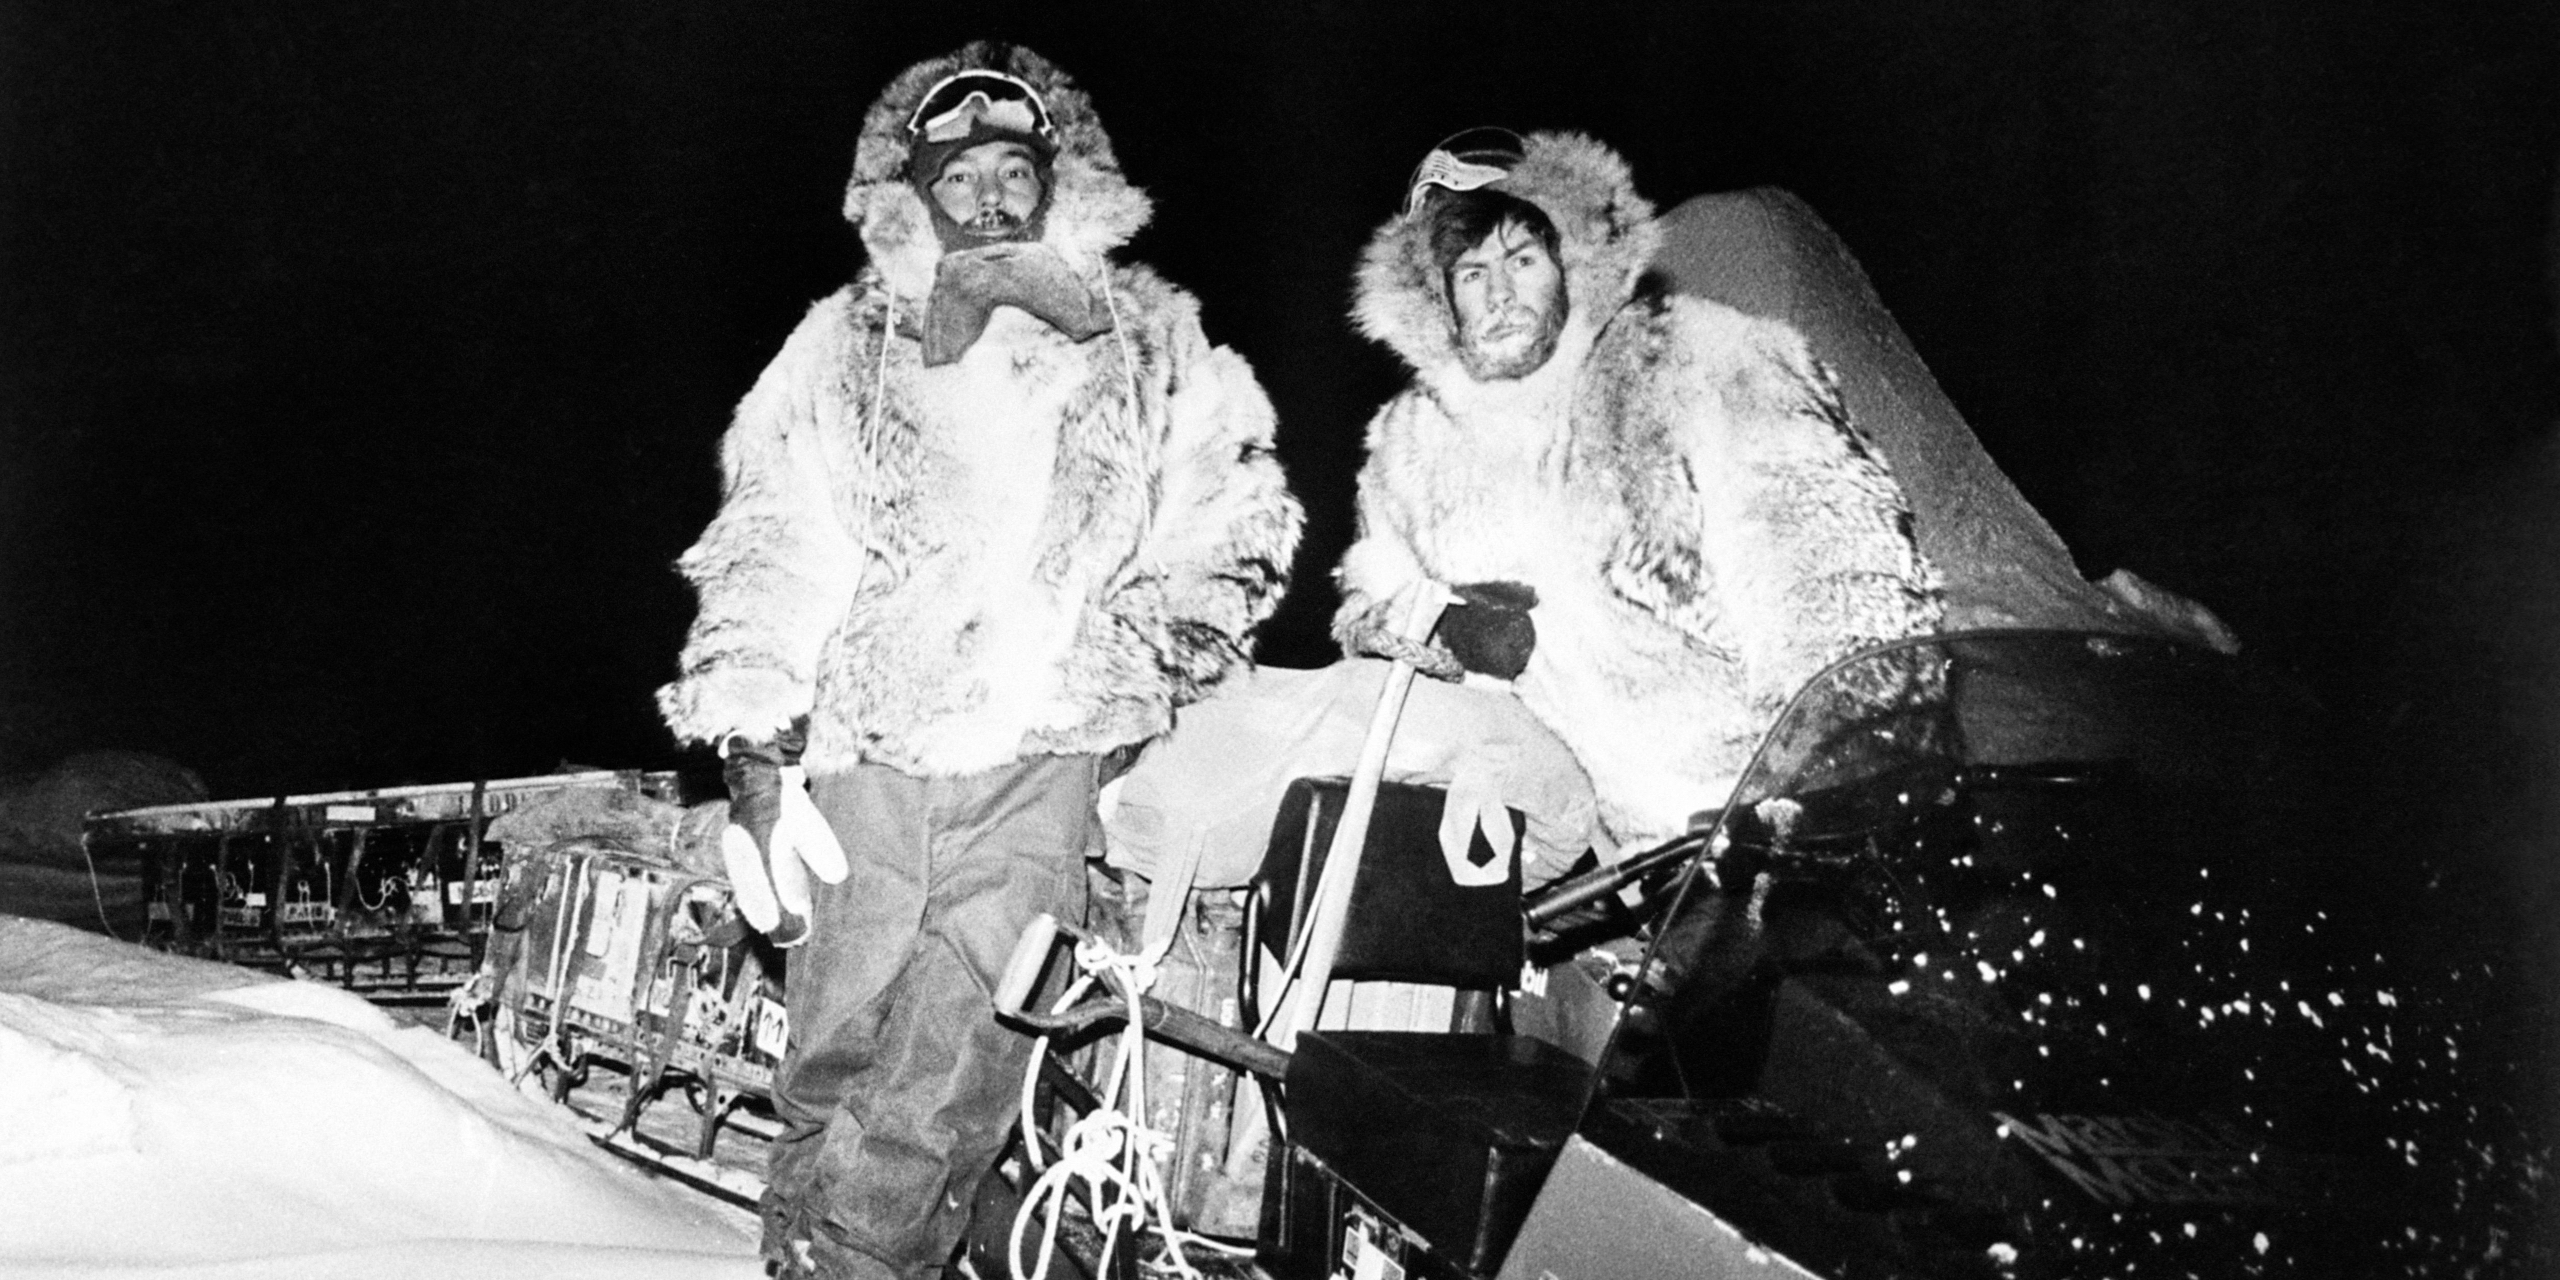 <strong>COLD WAR</strong><br/><span>Charles Burton and Fiennes in the arctic darkness</span>